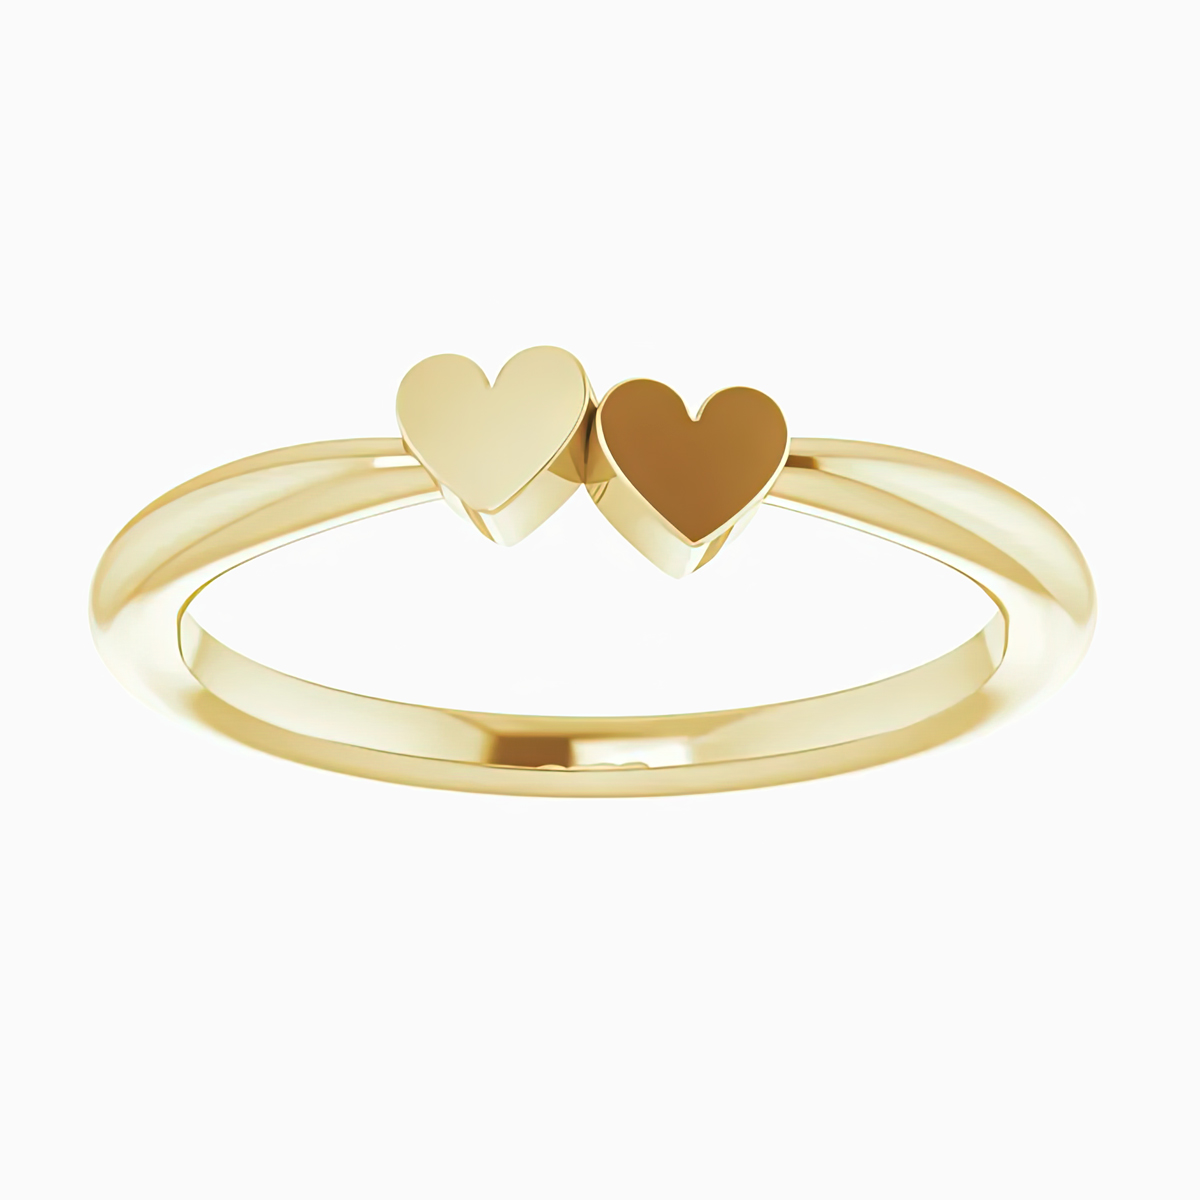 Two Hearts Motif Ring, 14k Gold